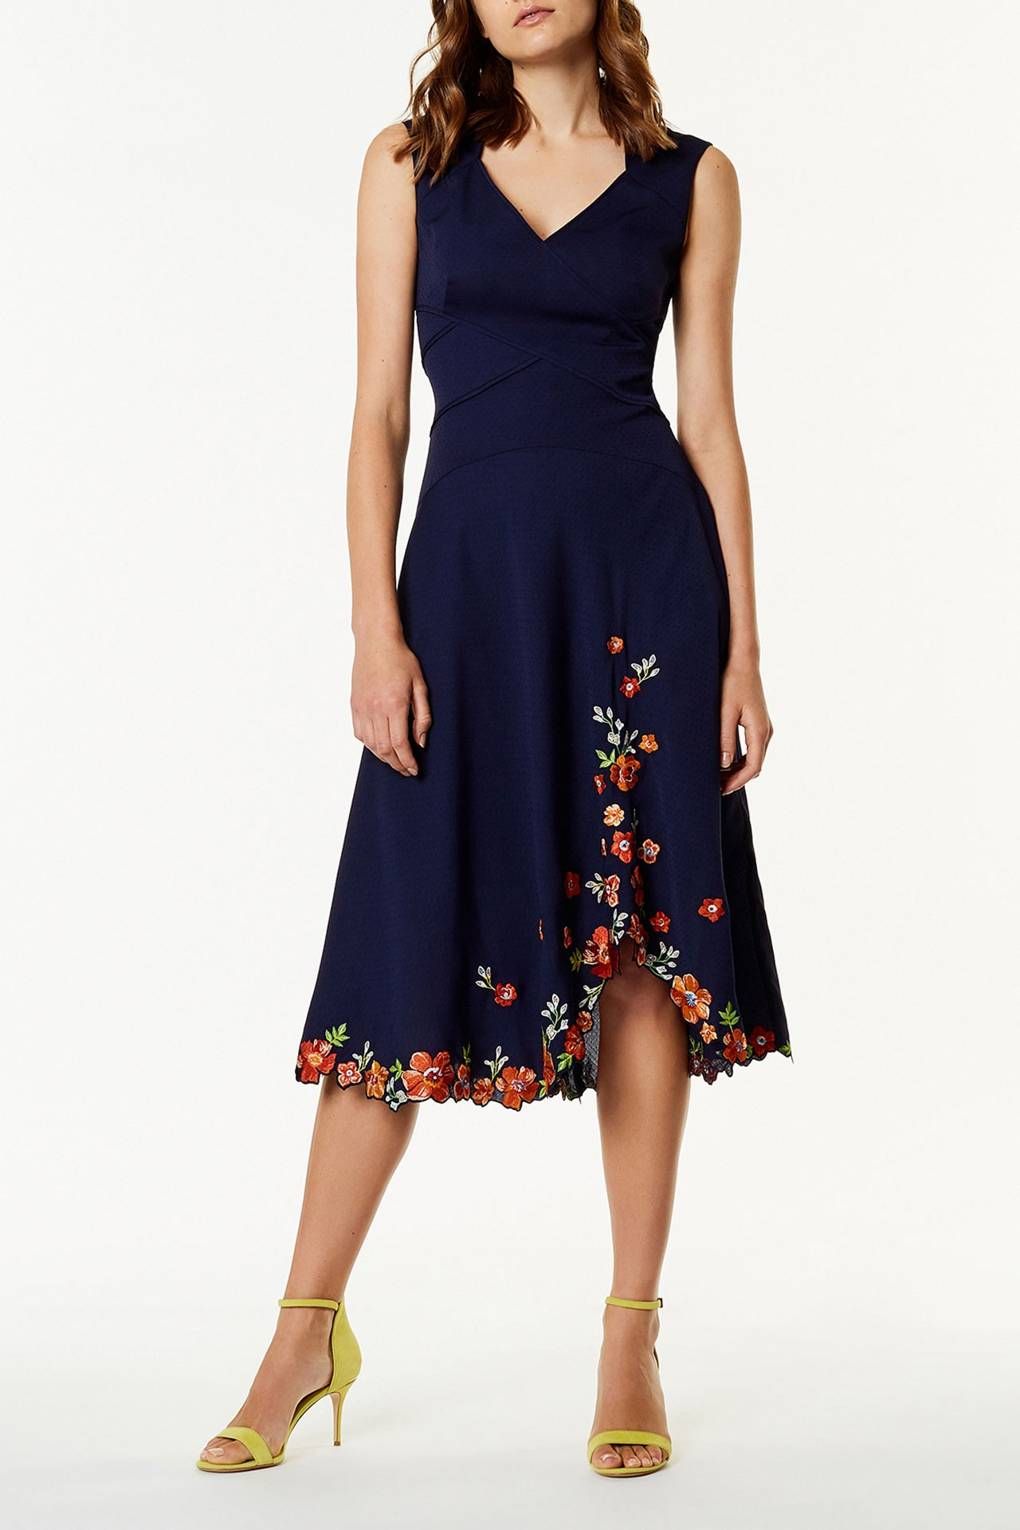 37 Summer Wedding Guest Dresses to Get You Through the ...